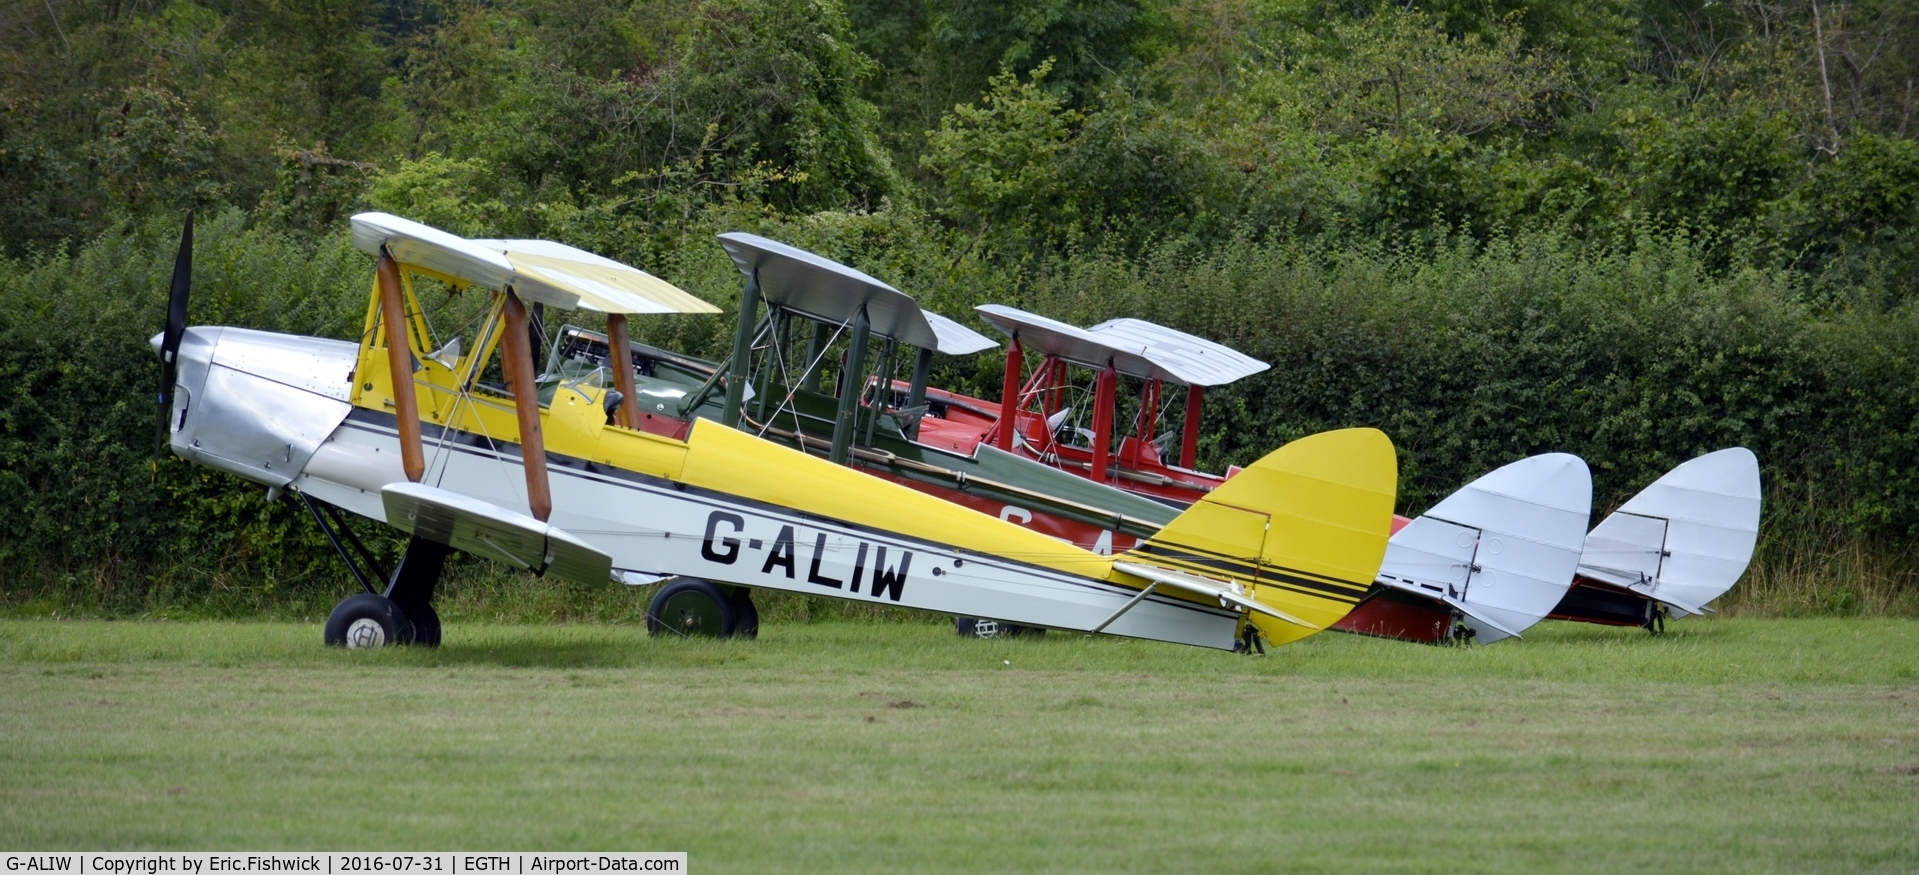 G-ALIW, 1938 De Havilland DH-82A Tiger Moth II C/N 82901, 5. G-ALIW (with ABDX and AAHY) at 'A Gathering of Moths,' Old Warden Aerodrome, Beds - July 2016.